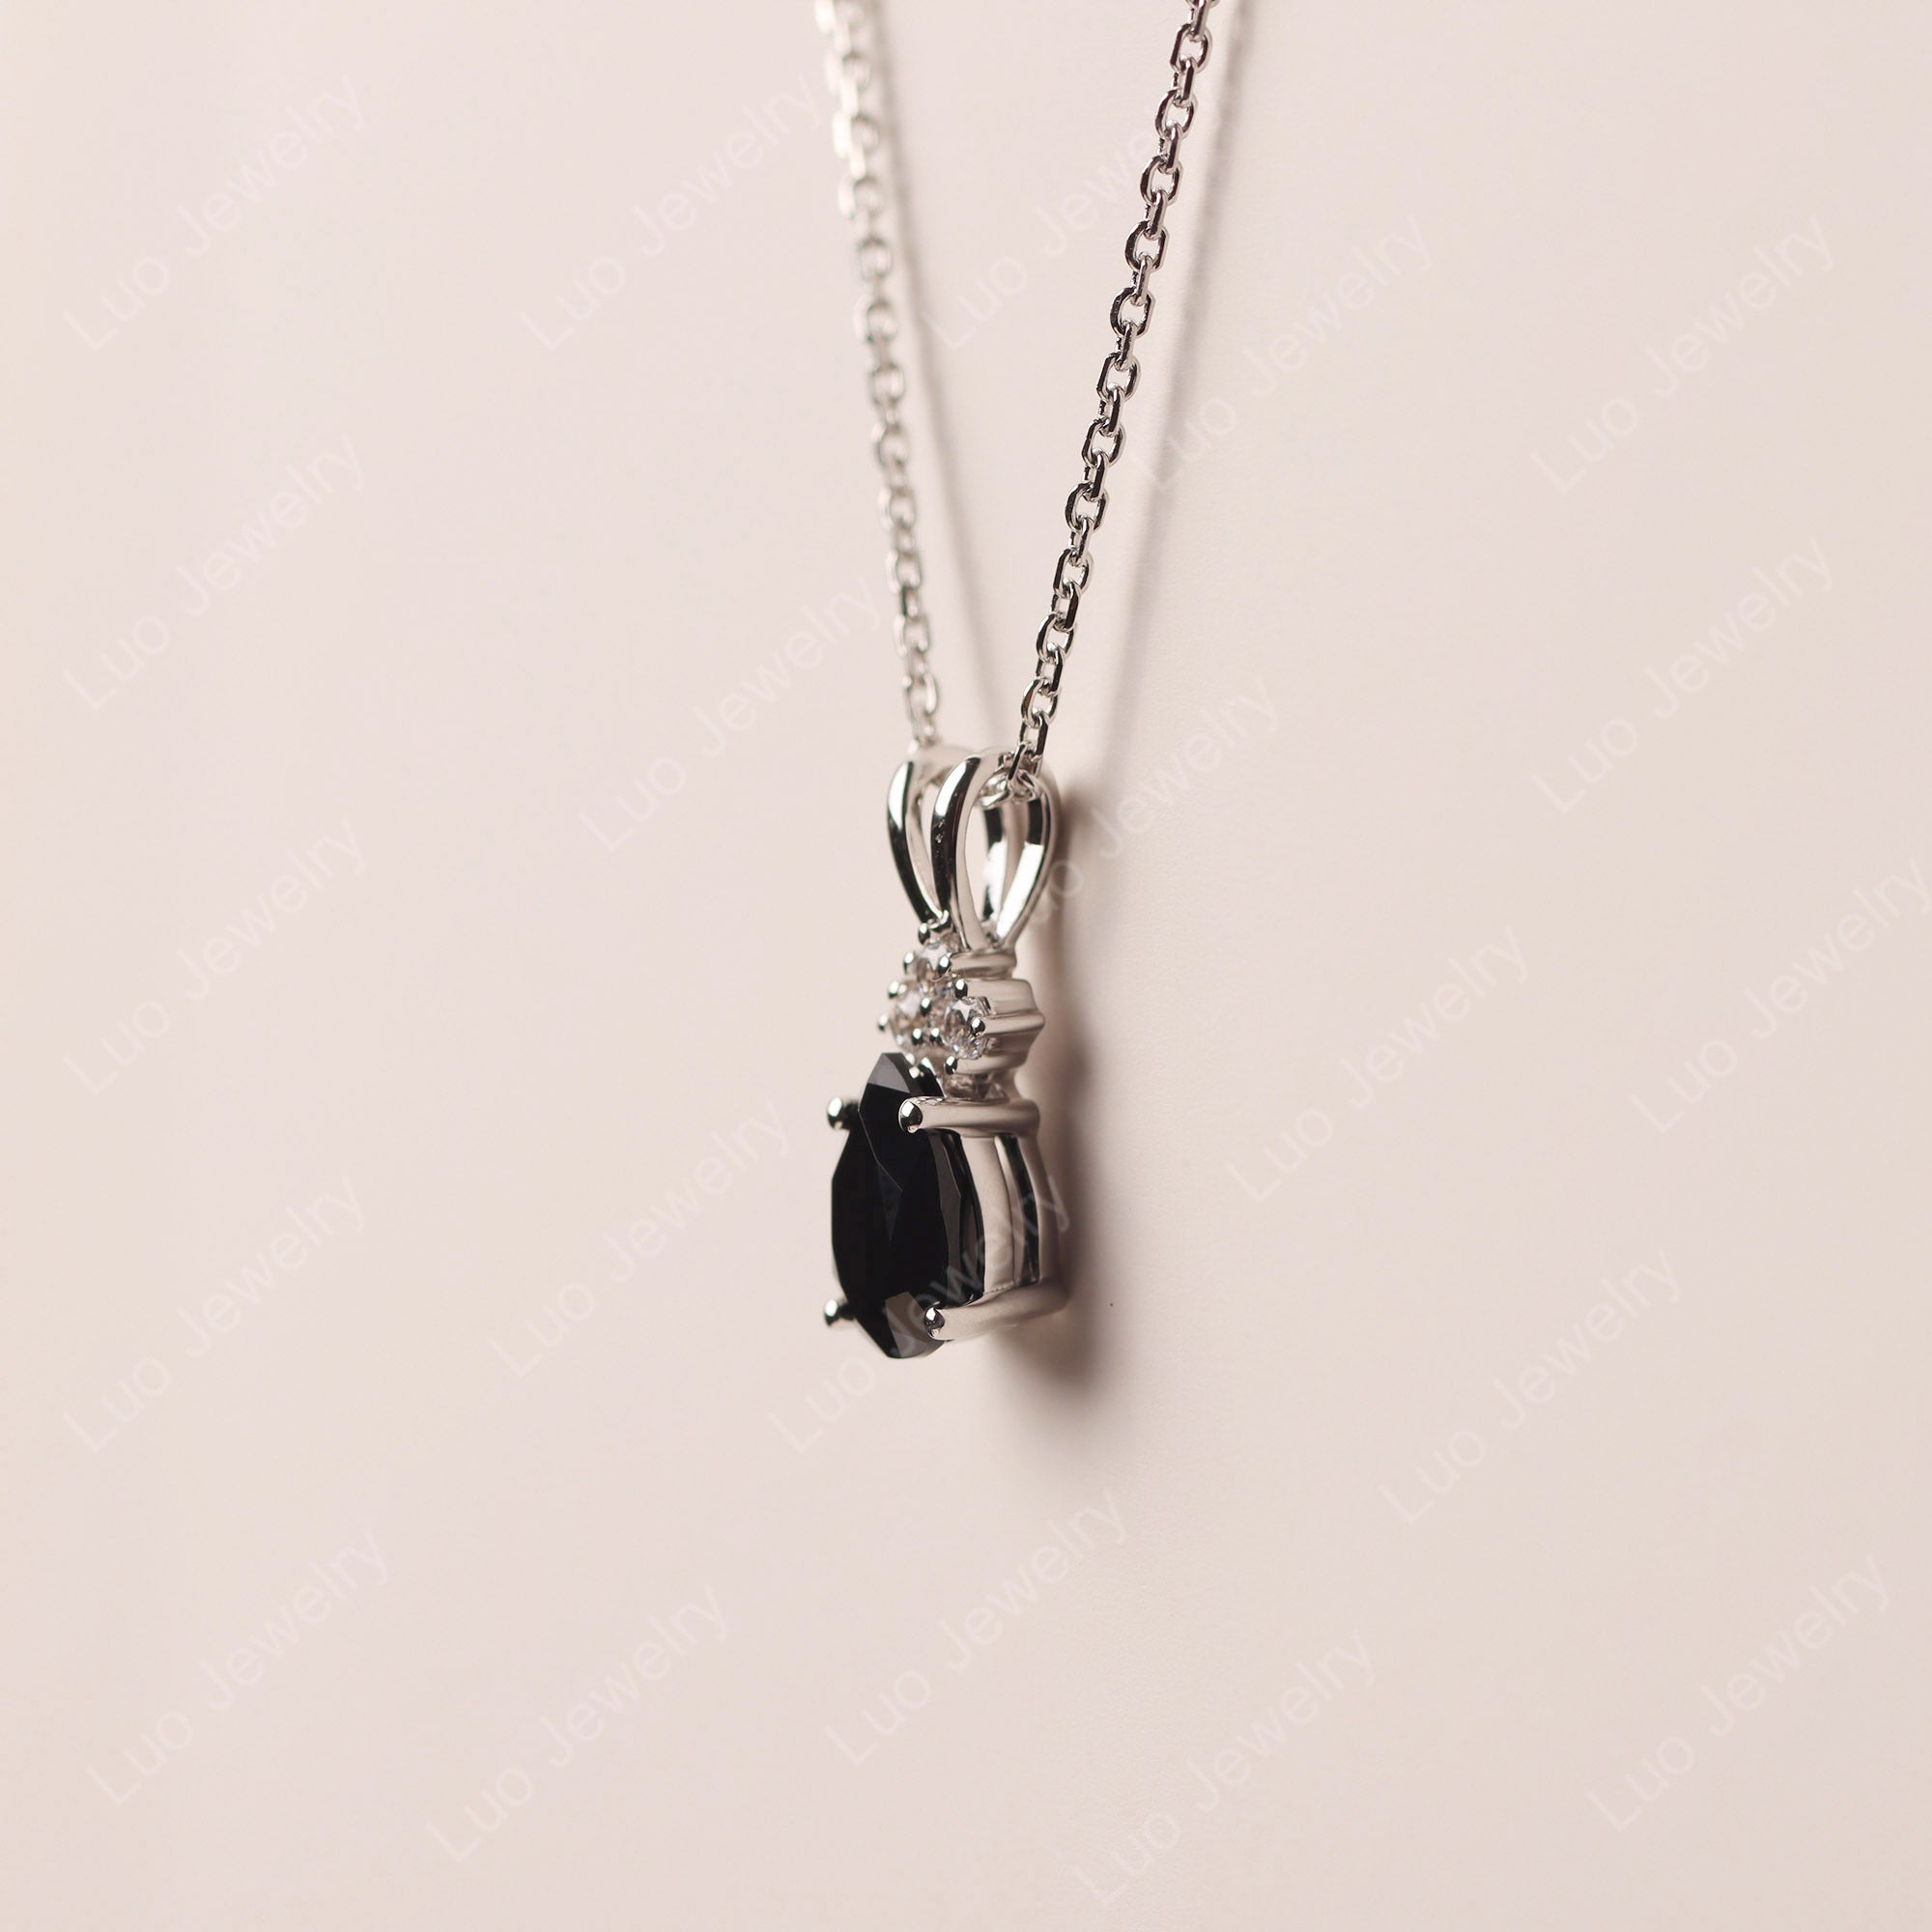 Pear Shaped Black Spinel Necklace